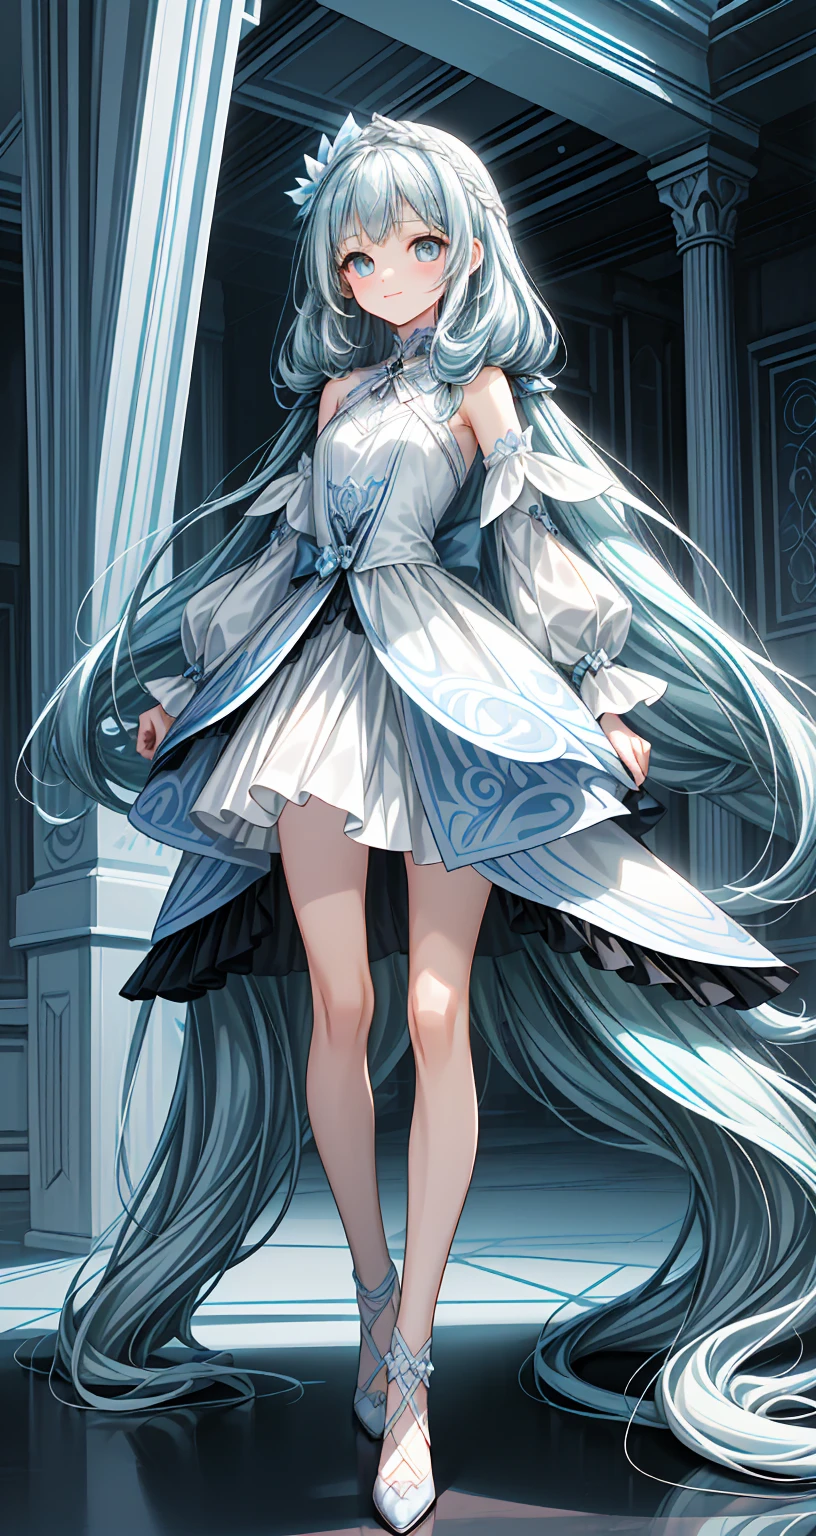 masterpiece, best quality, extremely detailed, (illustration, official art:1.1), 1 girl ,(((( light blue long hair)))), ,(((( light blue long hair)))),light blue hair, ,10 years old, long hair ((blush)) , cute face, big eyes, masterpiece, best quality,(((((a very delicate and beautiful girl))))),Amazing,beautiful detailed eyes,blunt bangs((((little delicate girl)))),tareme(true beautiful:1.2), sense of depth,dynamic angle,,,, affectionate smile, (true beautiful:1.2),,(tiny 1girl model:1.2),)(flat chest), masutepiece, Best Quality, an film still, 1girl in, Floating in the sky, Cloud Girl, Clouds, (close-up: 1.1), Bright, Happy, funny, Soft lighting, (Bauhaus, shapes, lines, Abstract: 1.1), Full body shot, Full body portrait, Slender beautiful legs